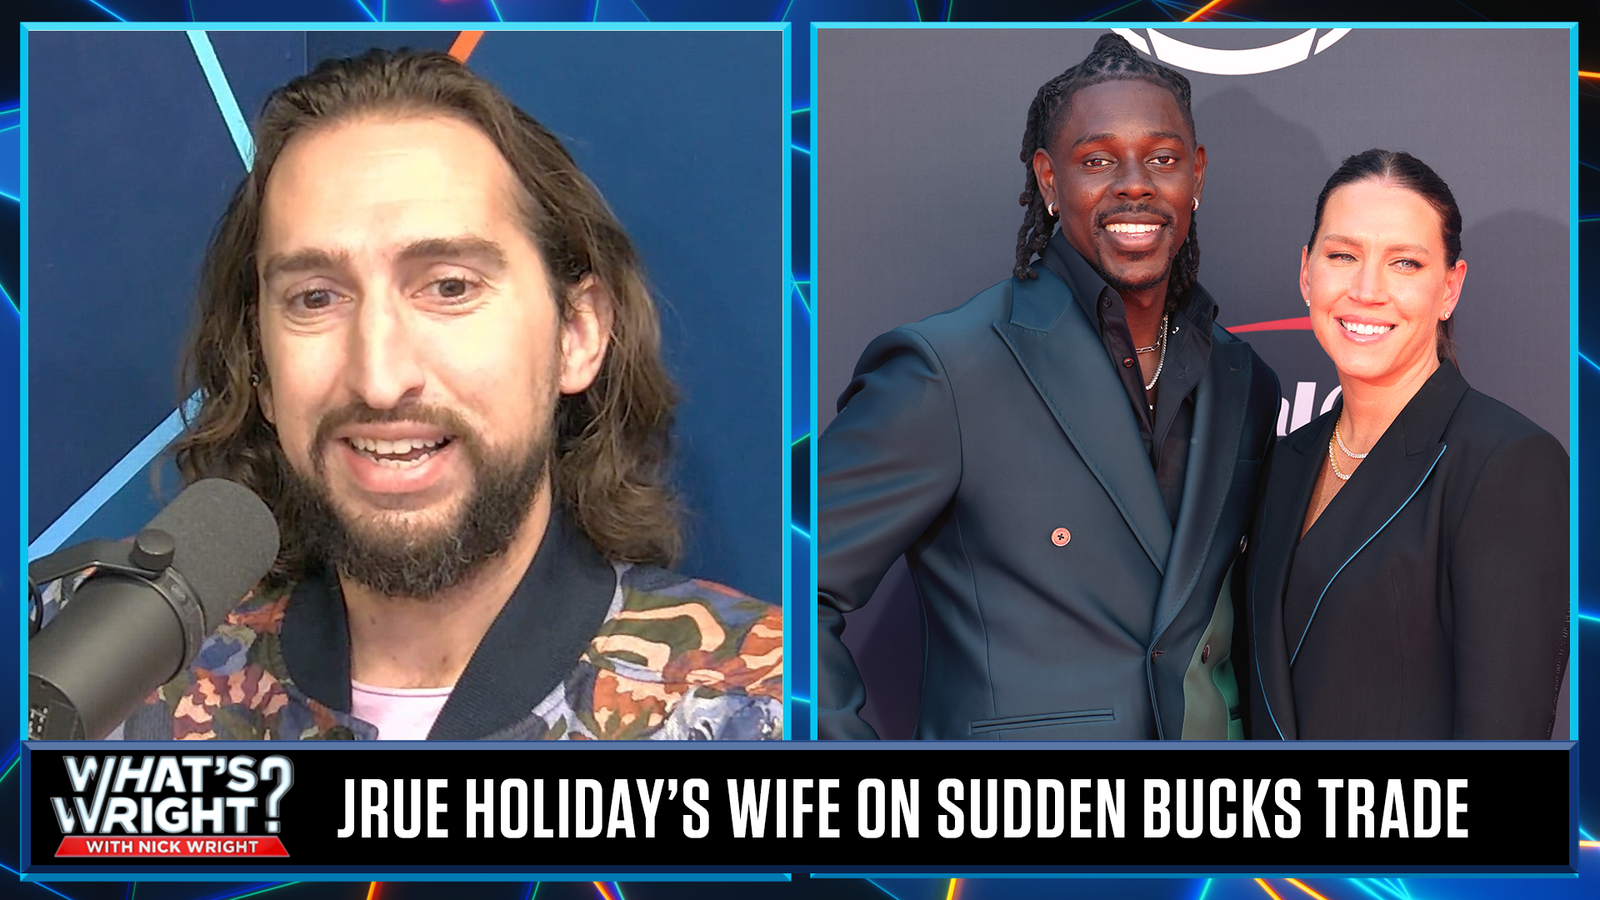 Jrue Holiday's wife calls sudden trade to Boston 'personal'